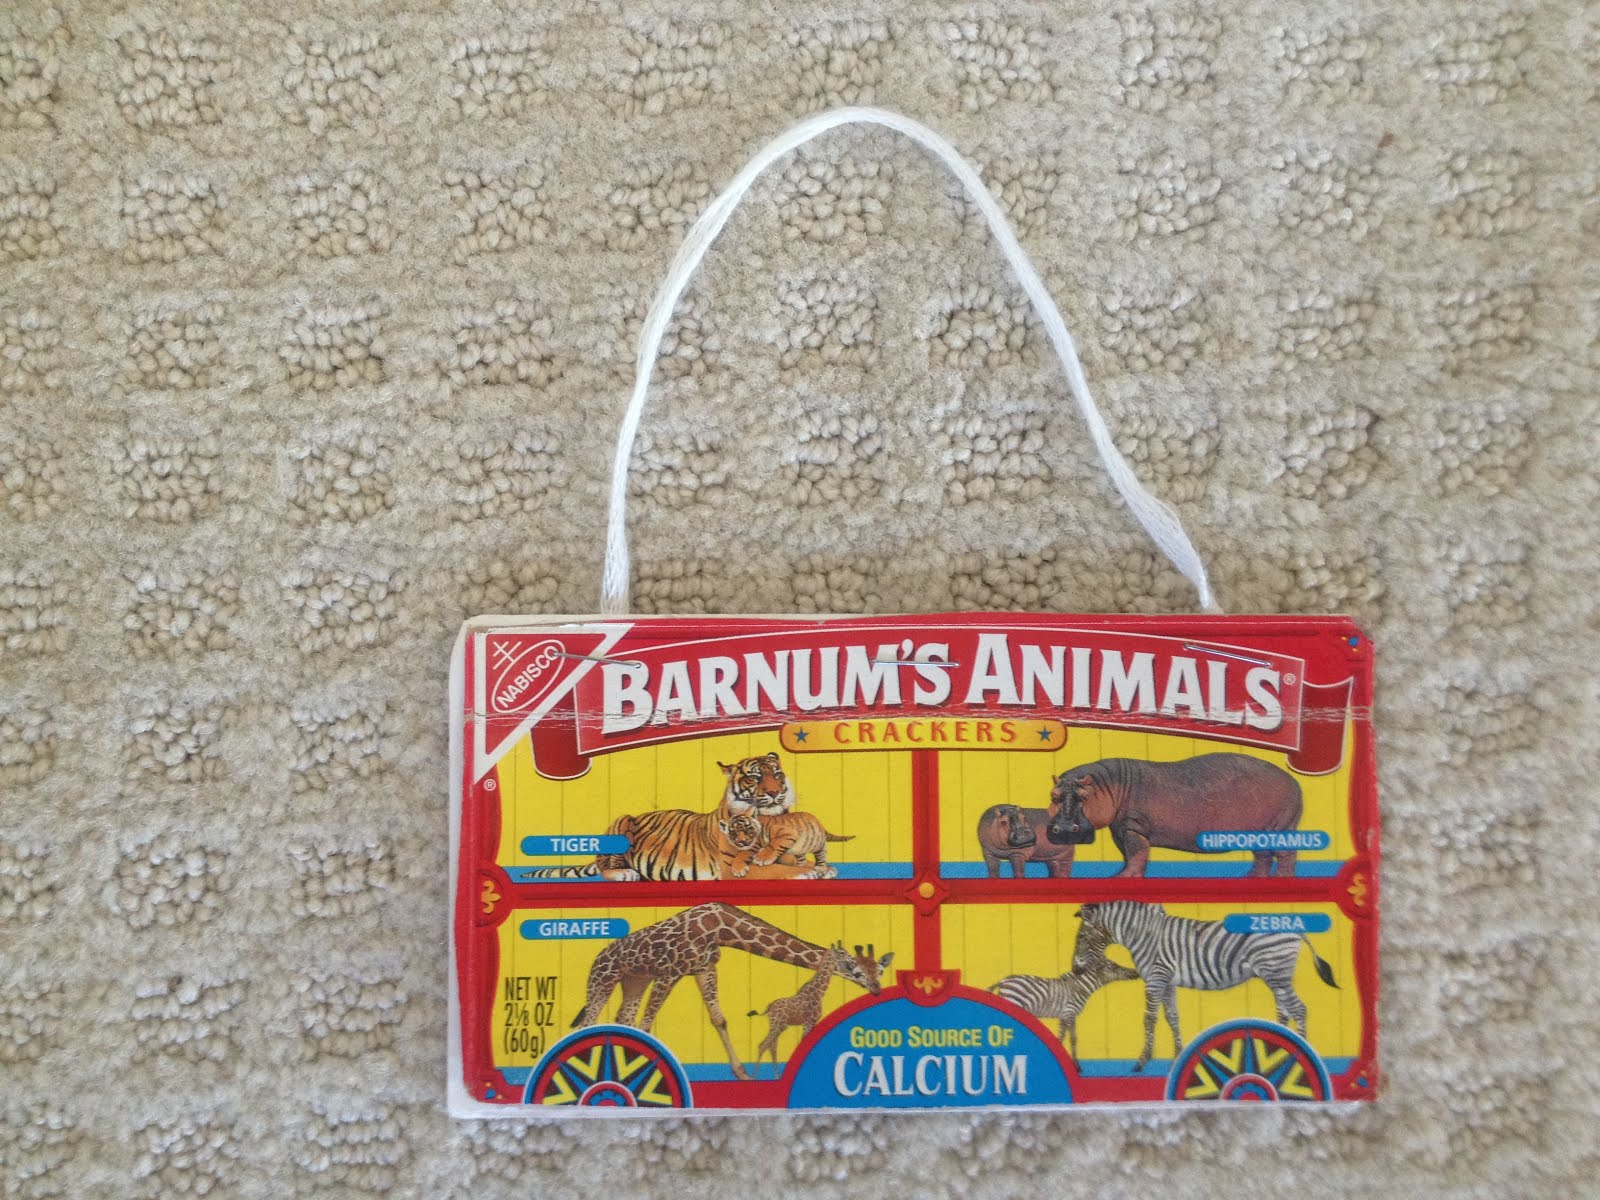 Dr. Jean & Friends Blog: ANIMAL CRACKERS